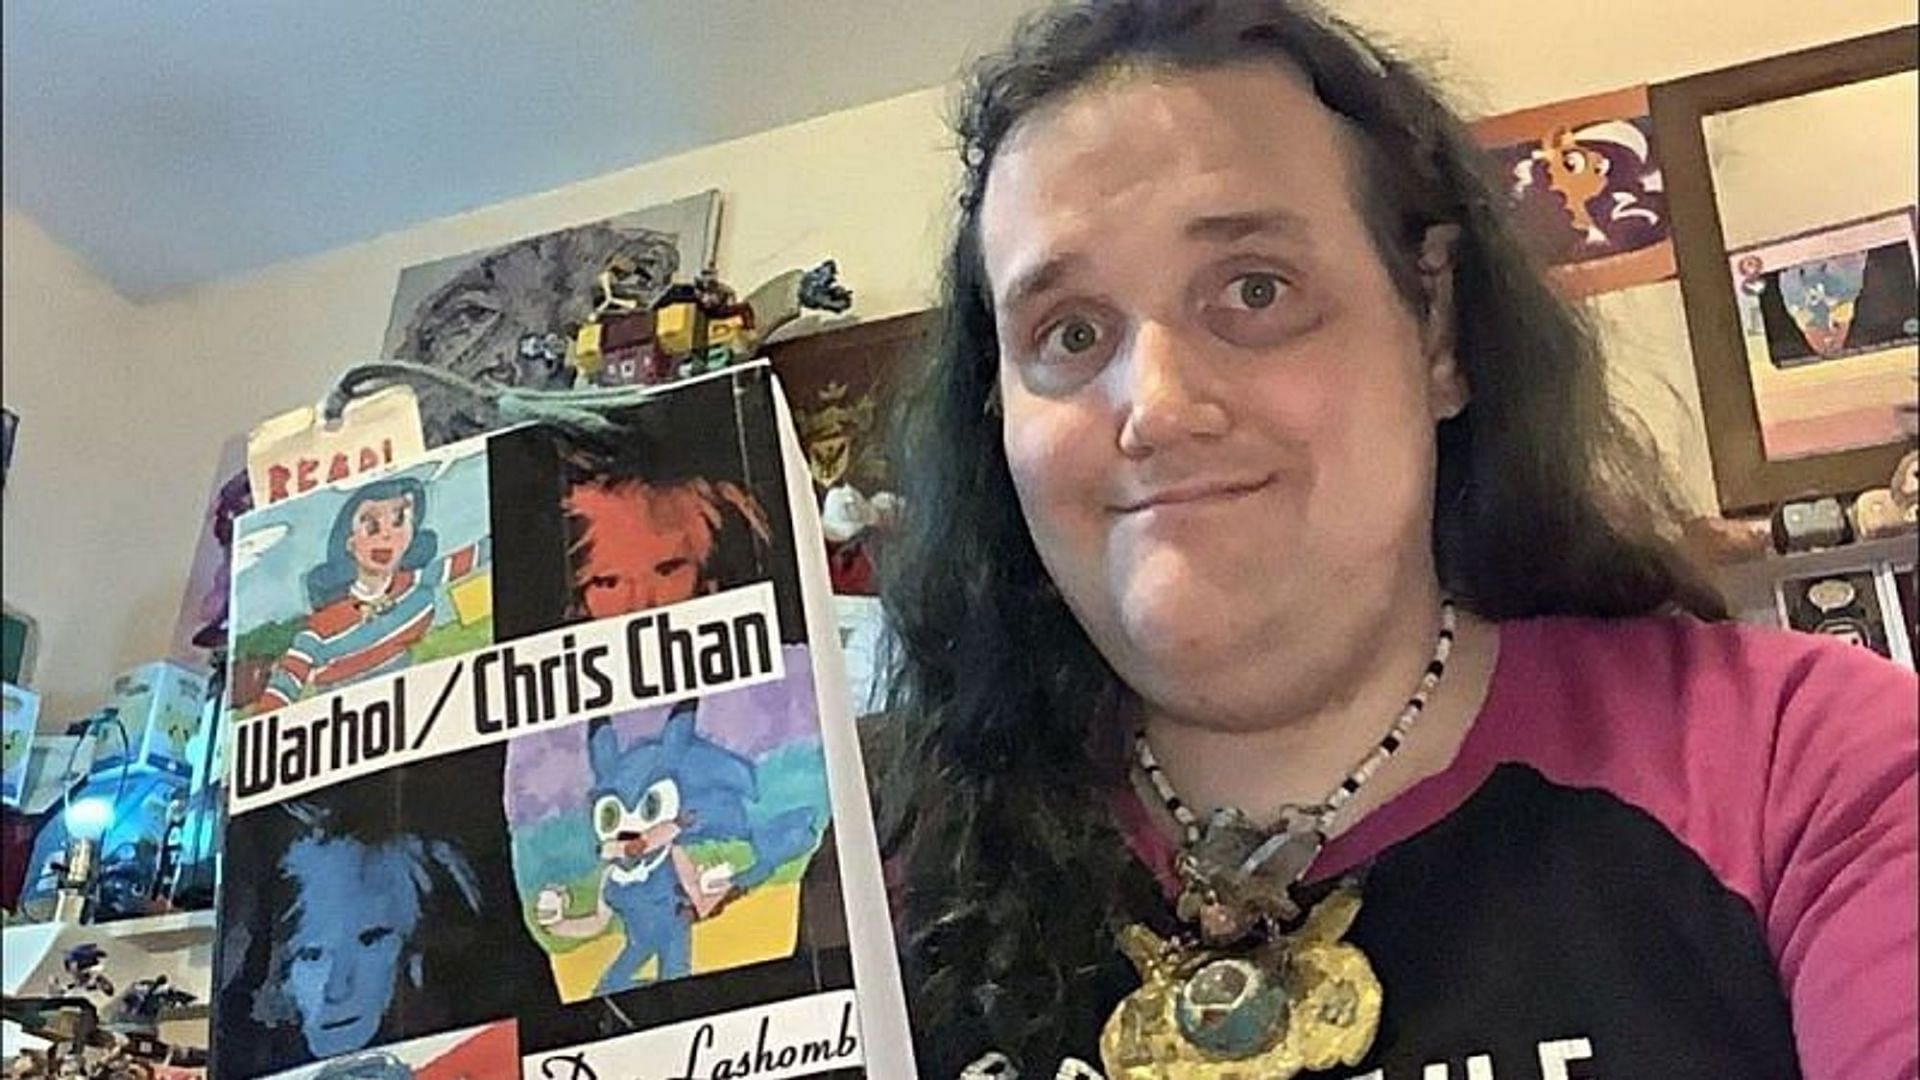 What is a Grand Jury? Chris Chan trial and court case details explored